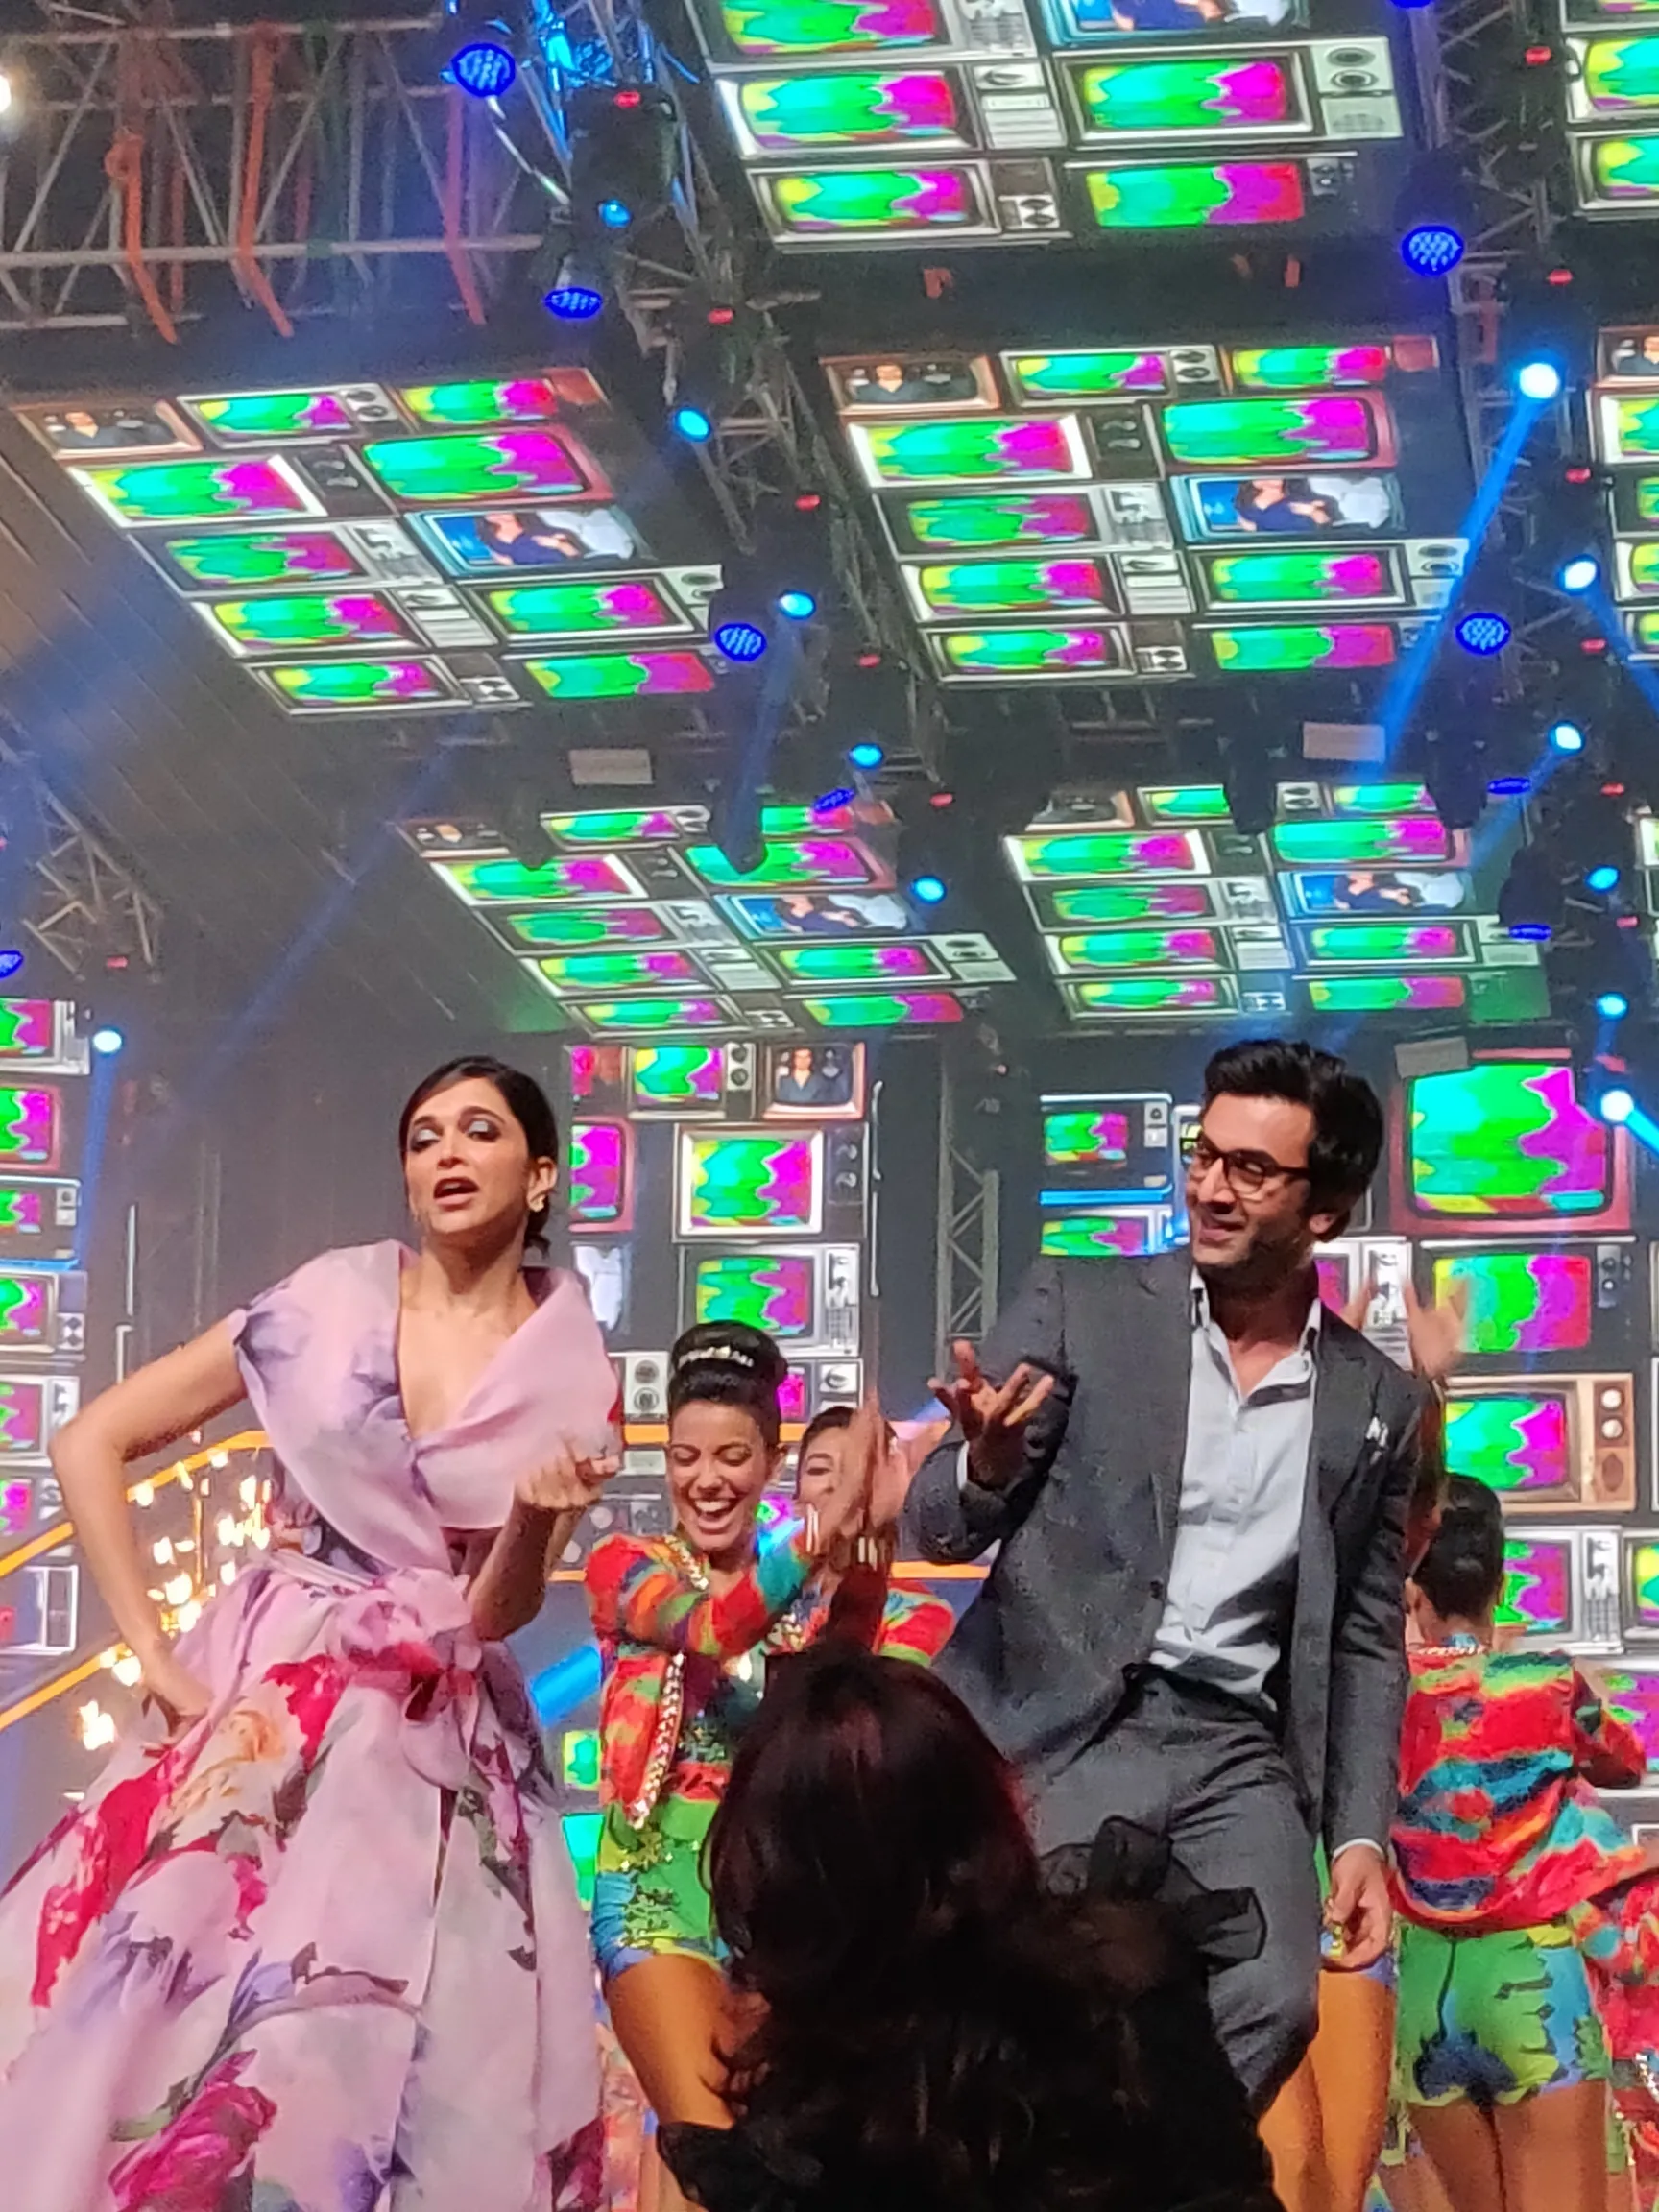 Bollywood Stars Deepika Padukone & Ranbir Kapoor at the Asian Paints Dreaming With The Stars Event(1)